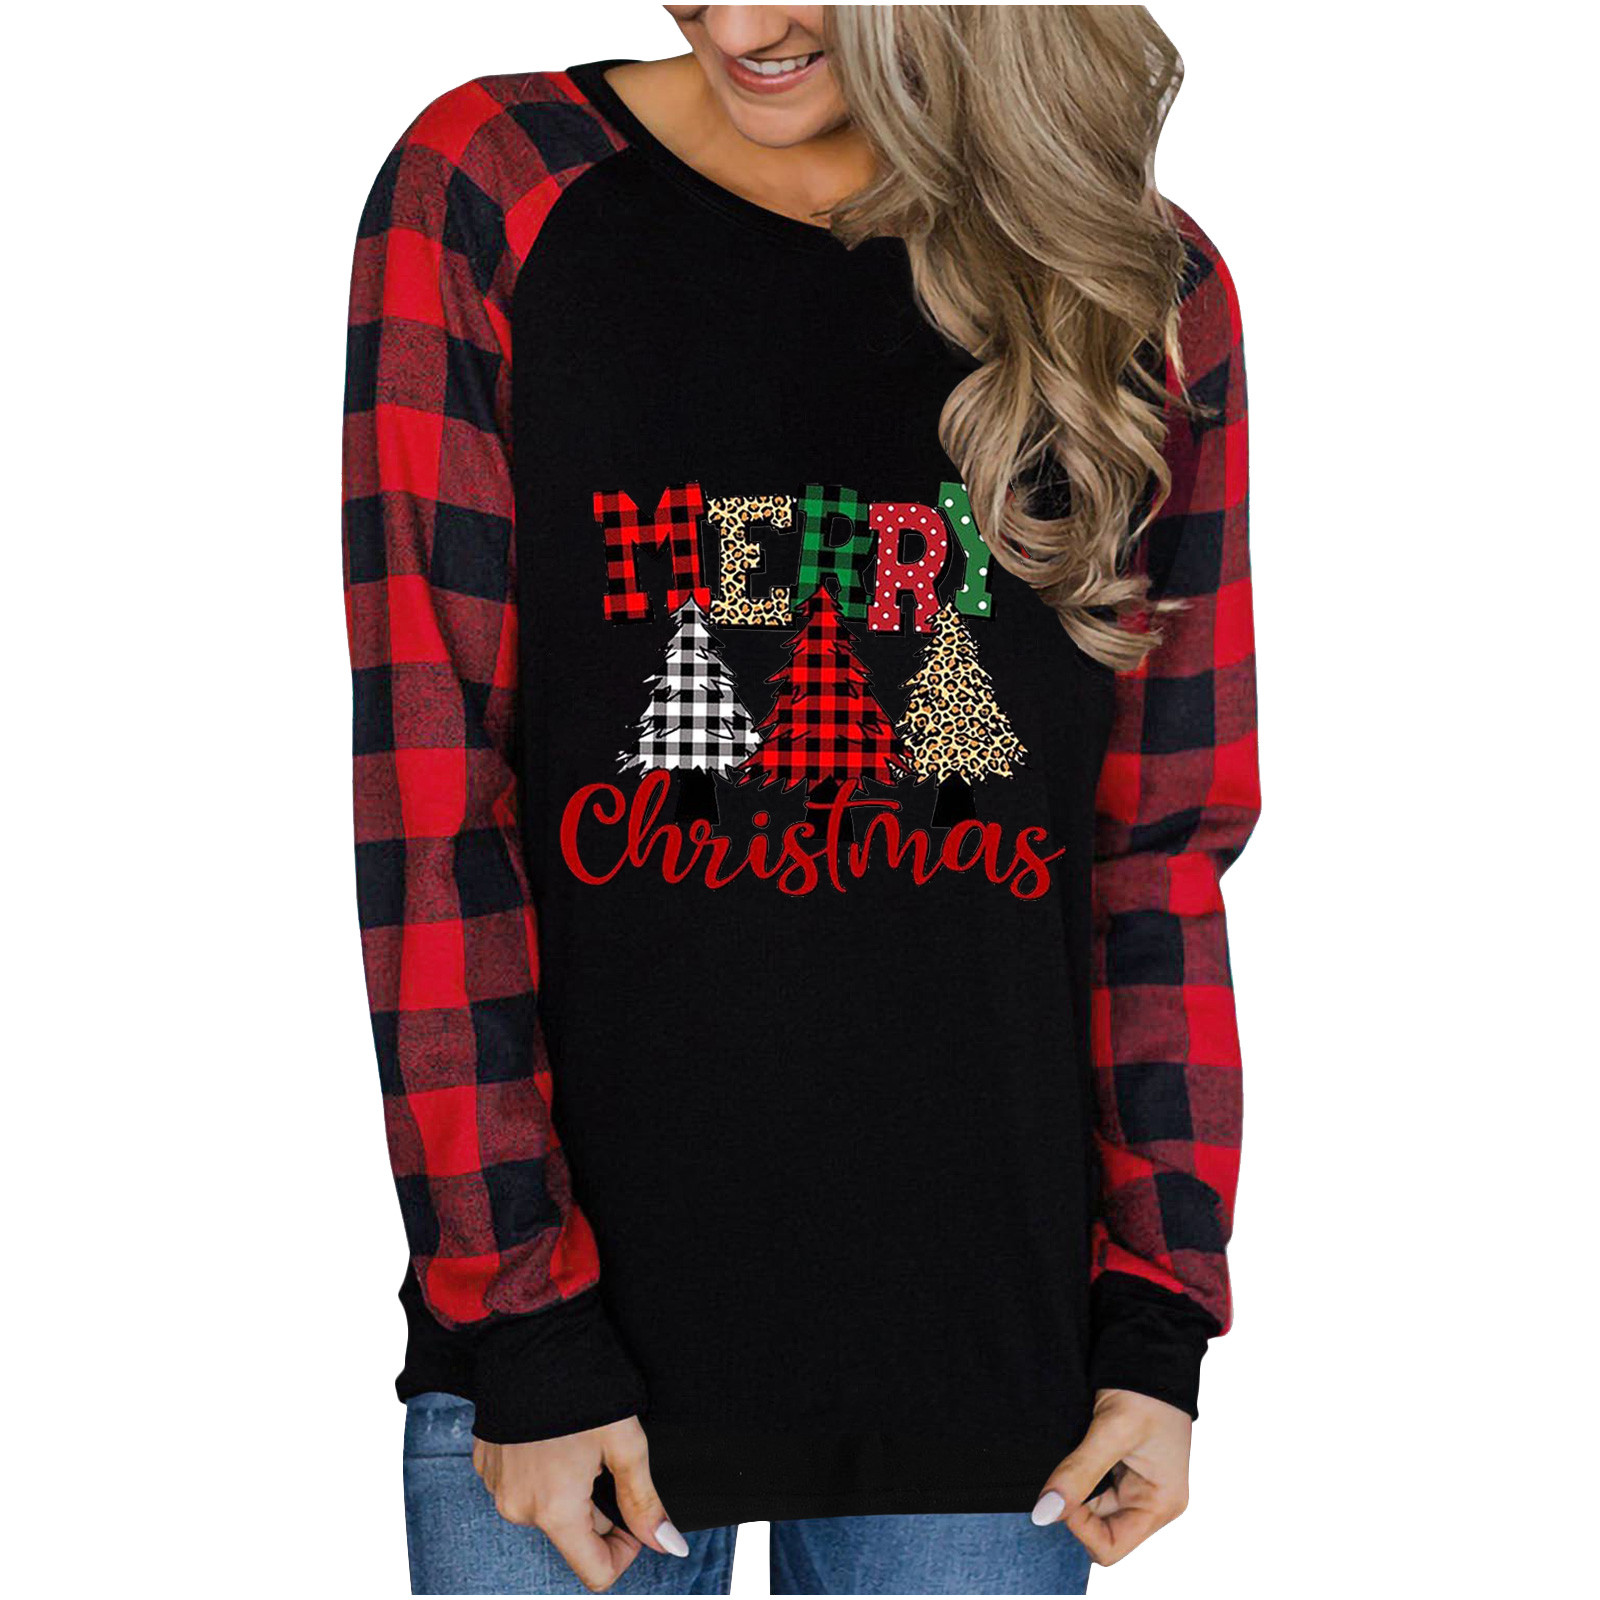 HAPIMO Clearance Womens Christmas Sweatshirts Casual Crewneck Long Sleeve  Christmas Graphic Print Pullover Lightweight Tops Red XL 